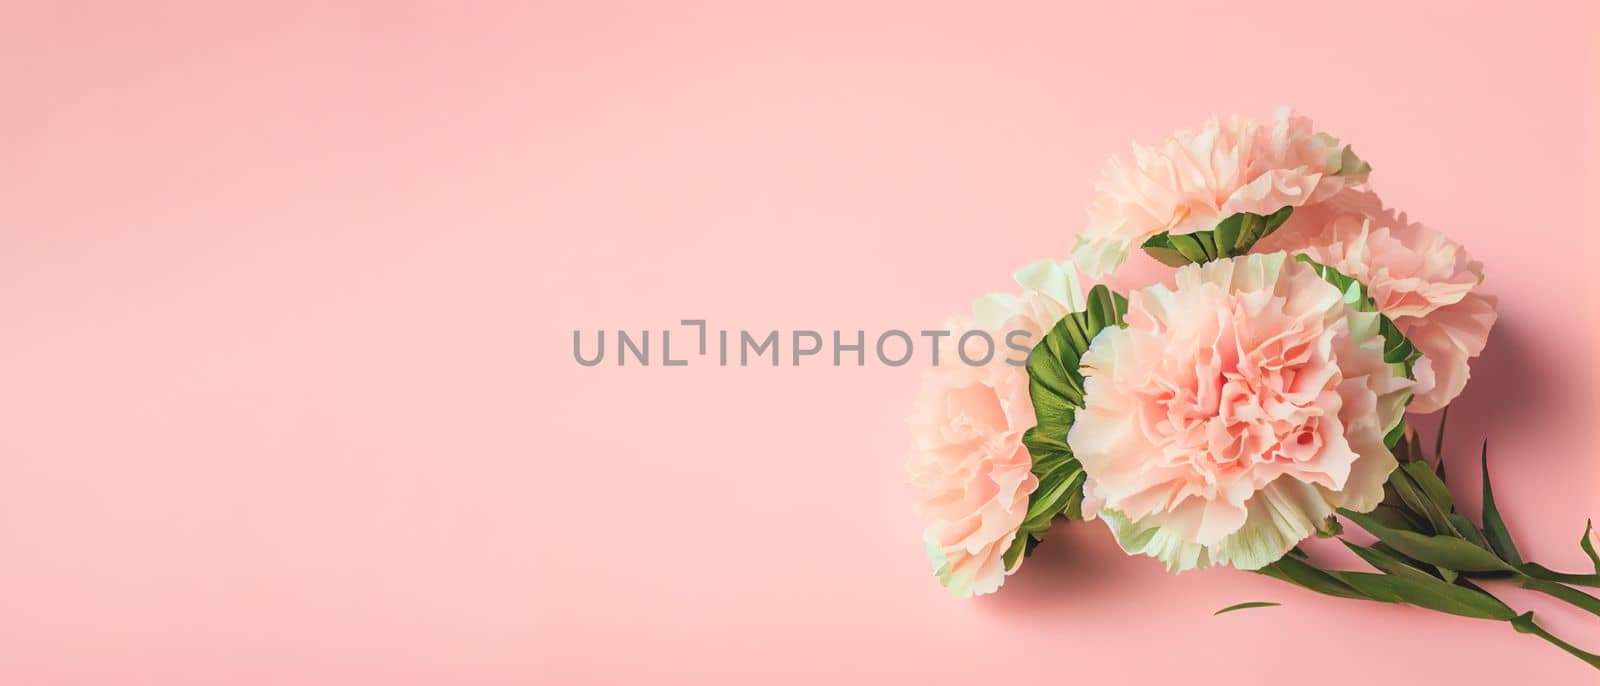 Carnation bouquet on pastel pink background with copy space. 3D illustration concept for Mother's Day holiday greetings card. Wide angle format banner. by FokasuArt